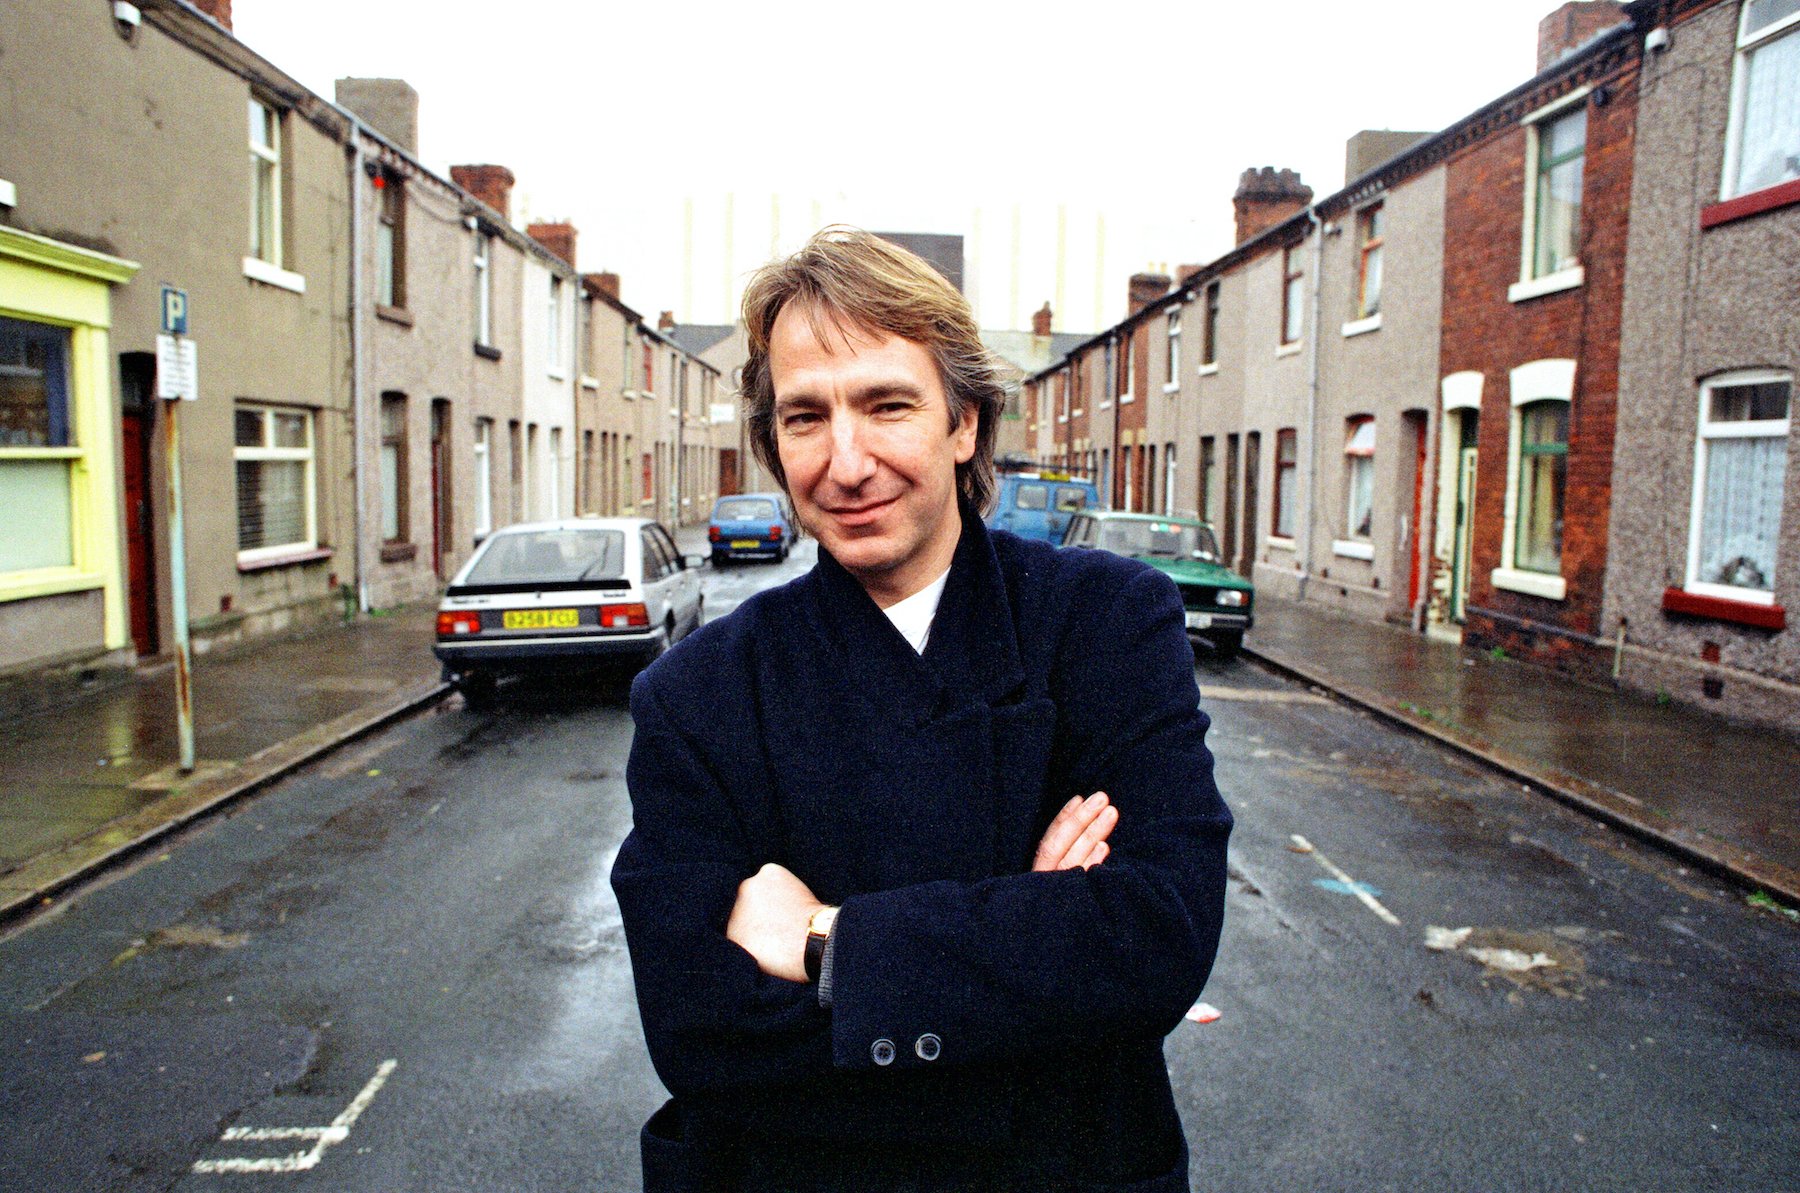 Alan Rickman smiling, pictured on the streets of Barrow In Furness